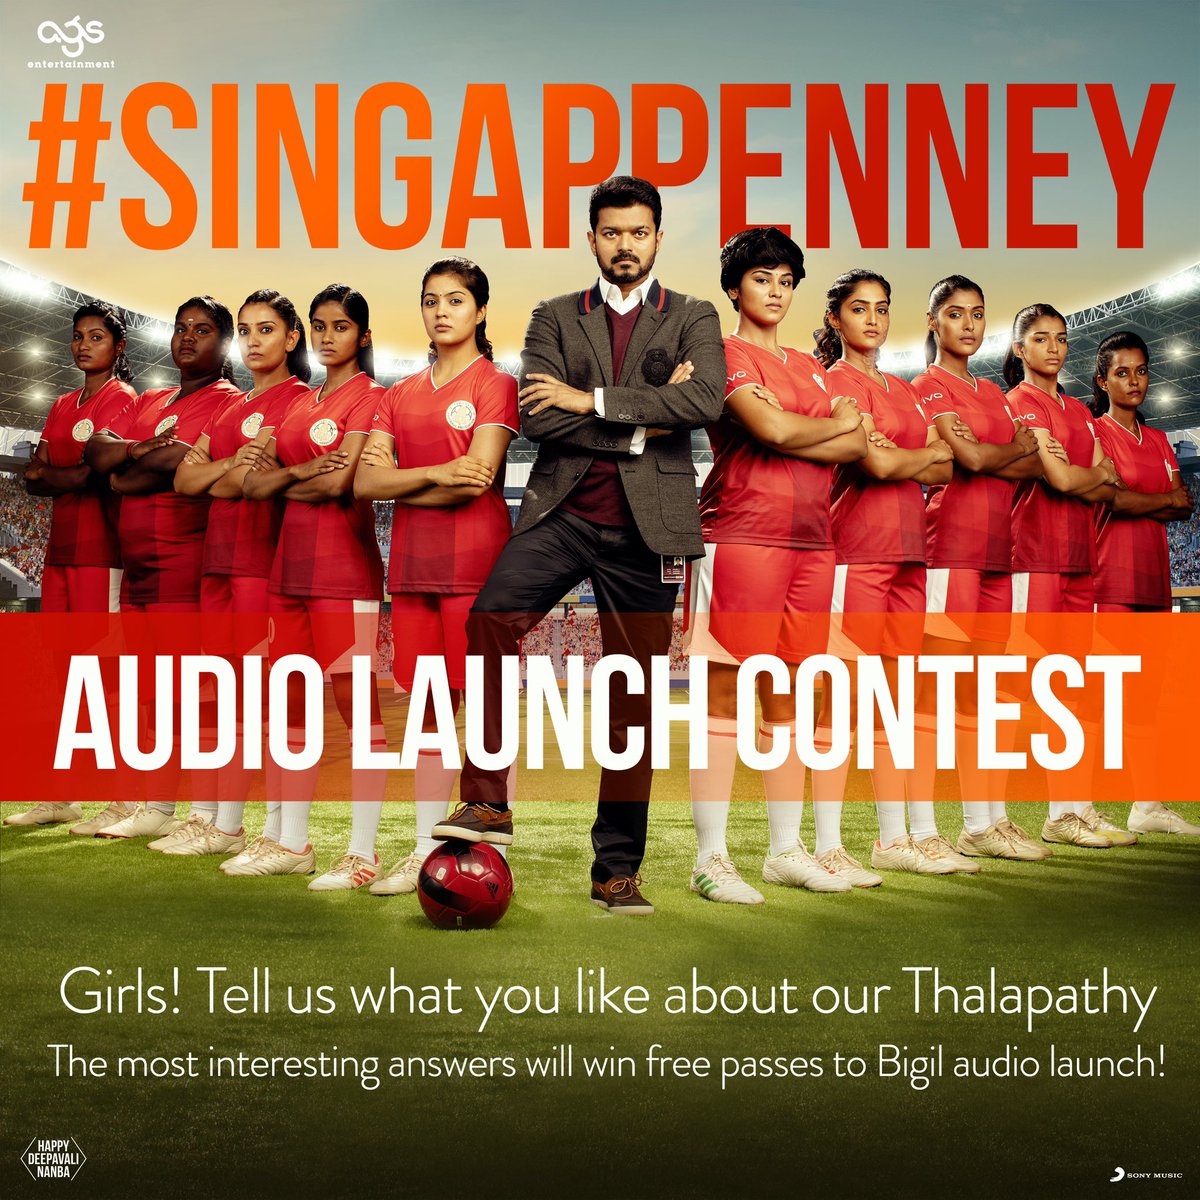 Super happy to announce a contest celebrating our #SINGAPENNEY ‘s & to host Thalapathy’s girl fans to come enjoy the grand #BIGILAudioLaunch on Sep19th winning free tickets 🥳🙌🏻! 
Remember this is for our Thalapathy female fans only ❤️😇.
Comment your answers below this poster👇🏻!